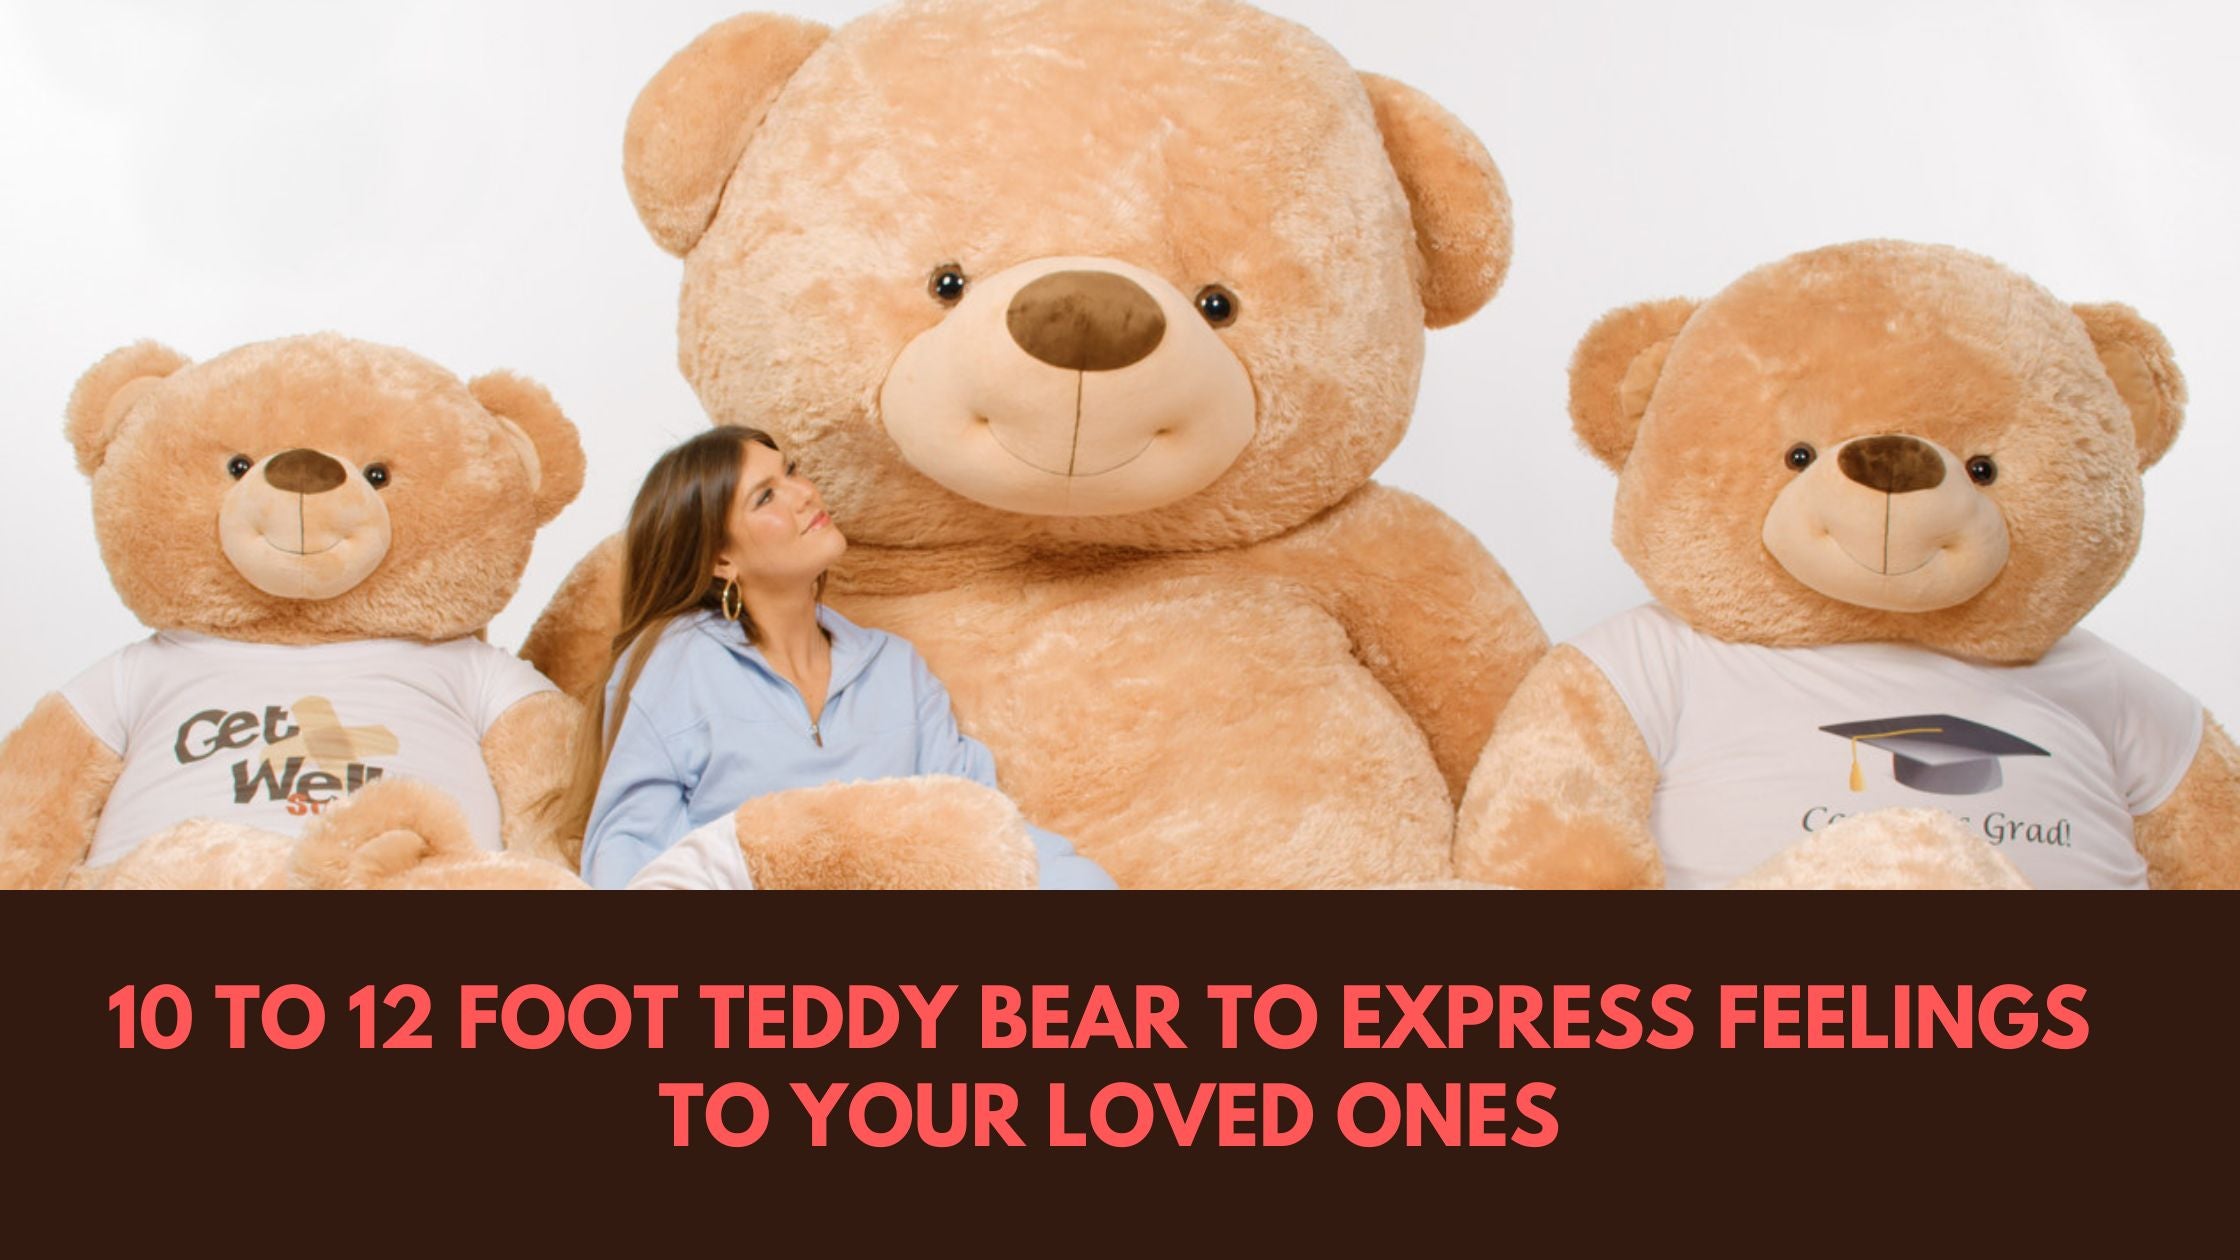 10 to 12 Foot Teddy Bear To Express Feelings To Your Loved Ones